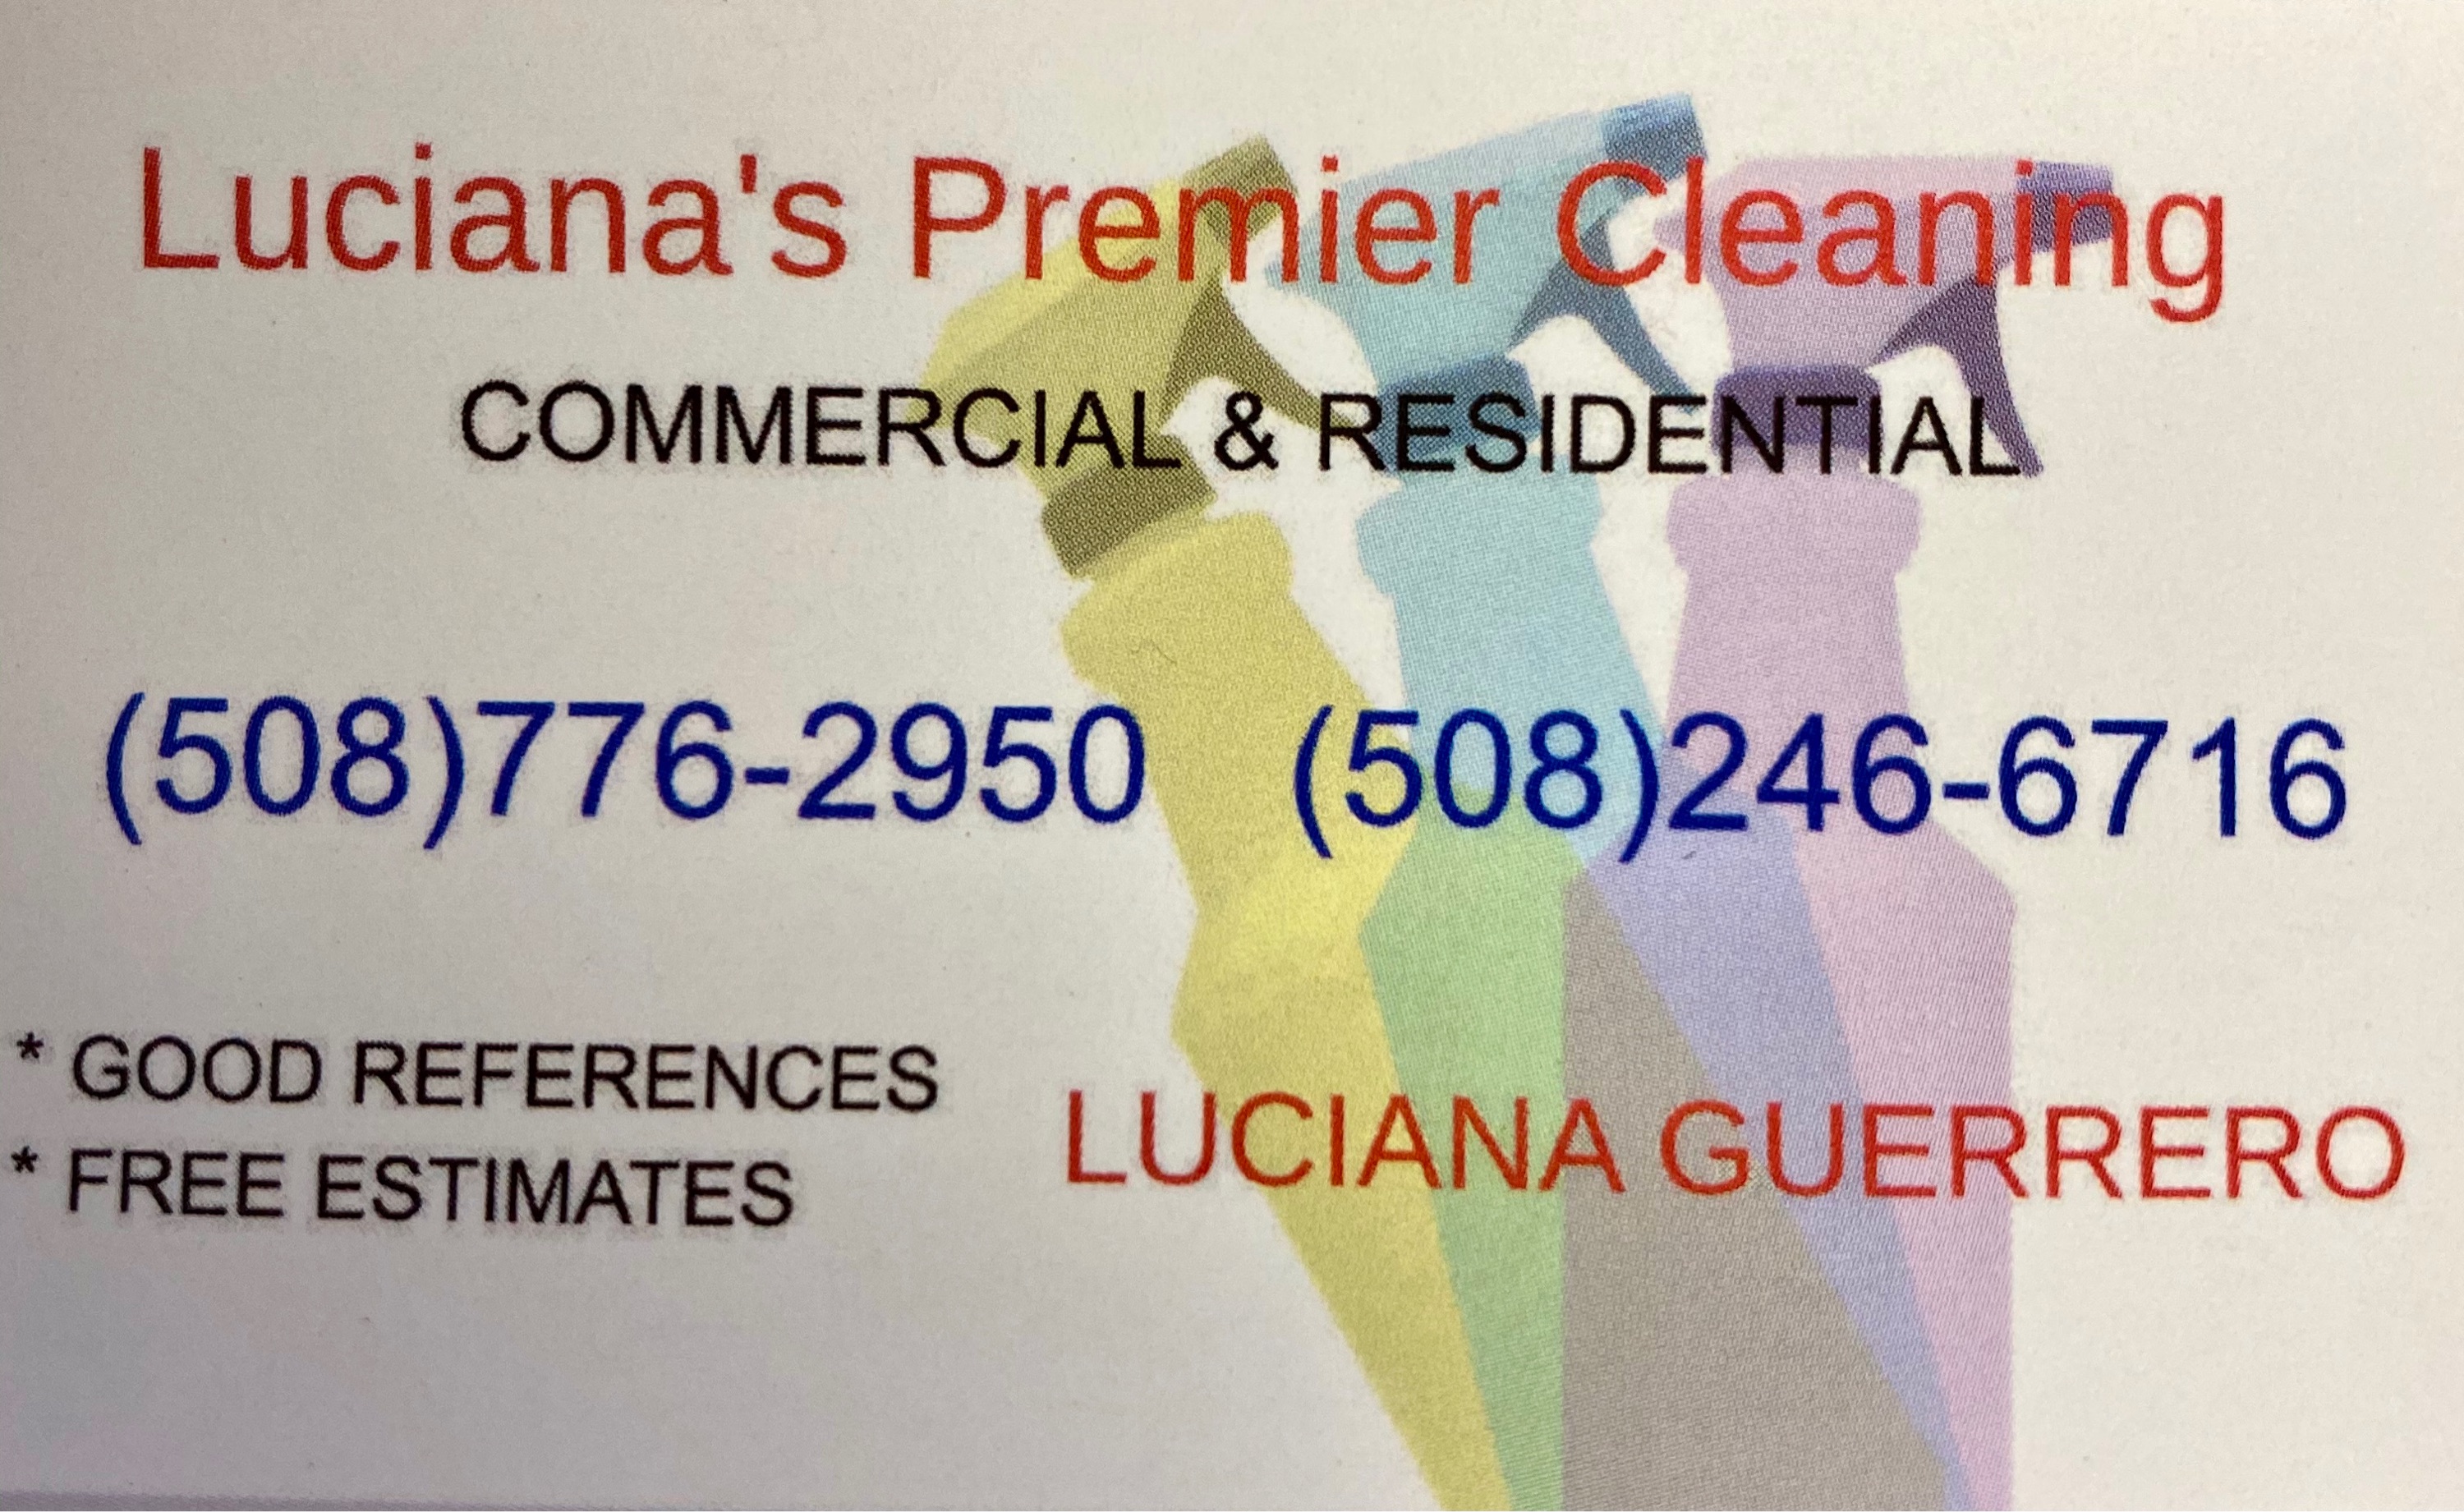 Luciana's Premiere Cleaning Logo